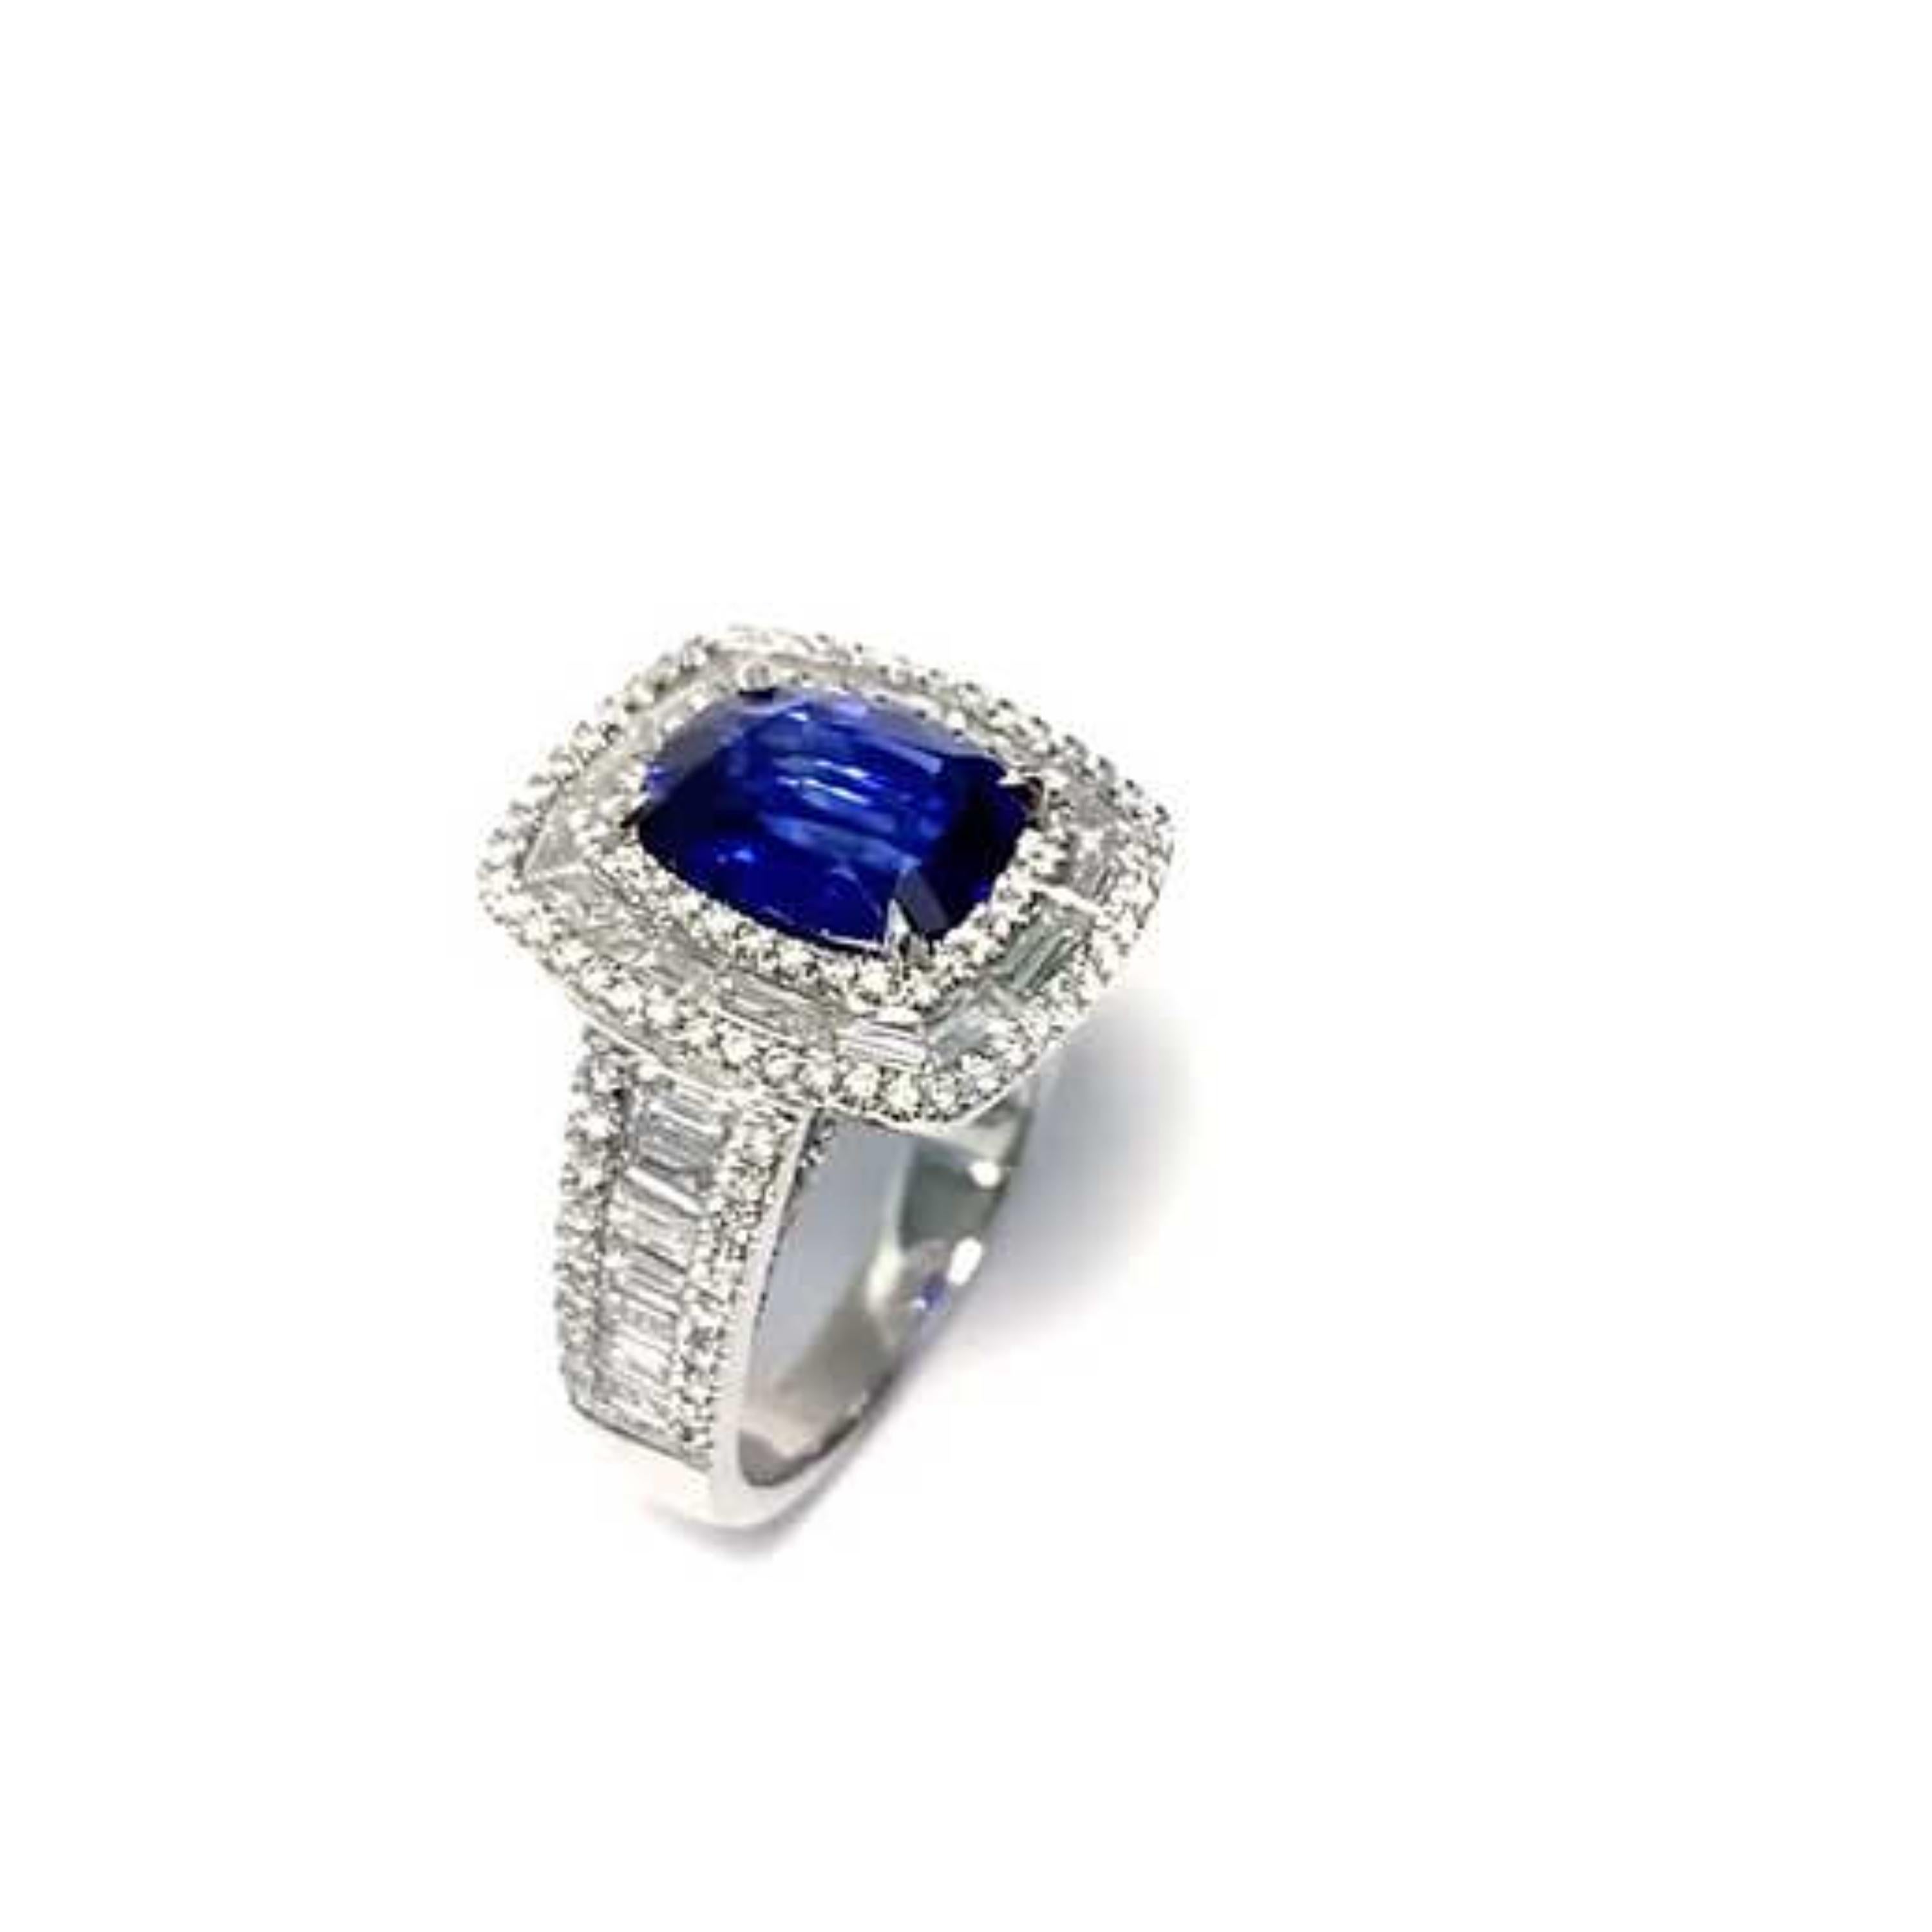 For Sale:  Antique 3 CT Natural Sapphire Diamond Engagement Band in 18K Gold, Cocktail Ring 3